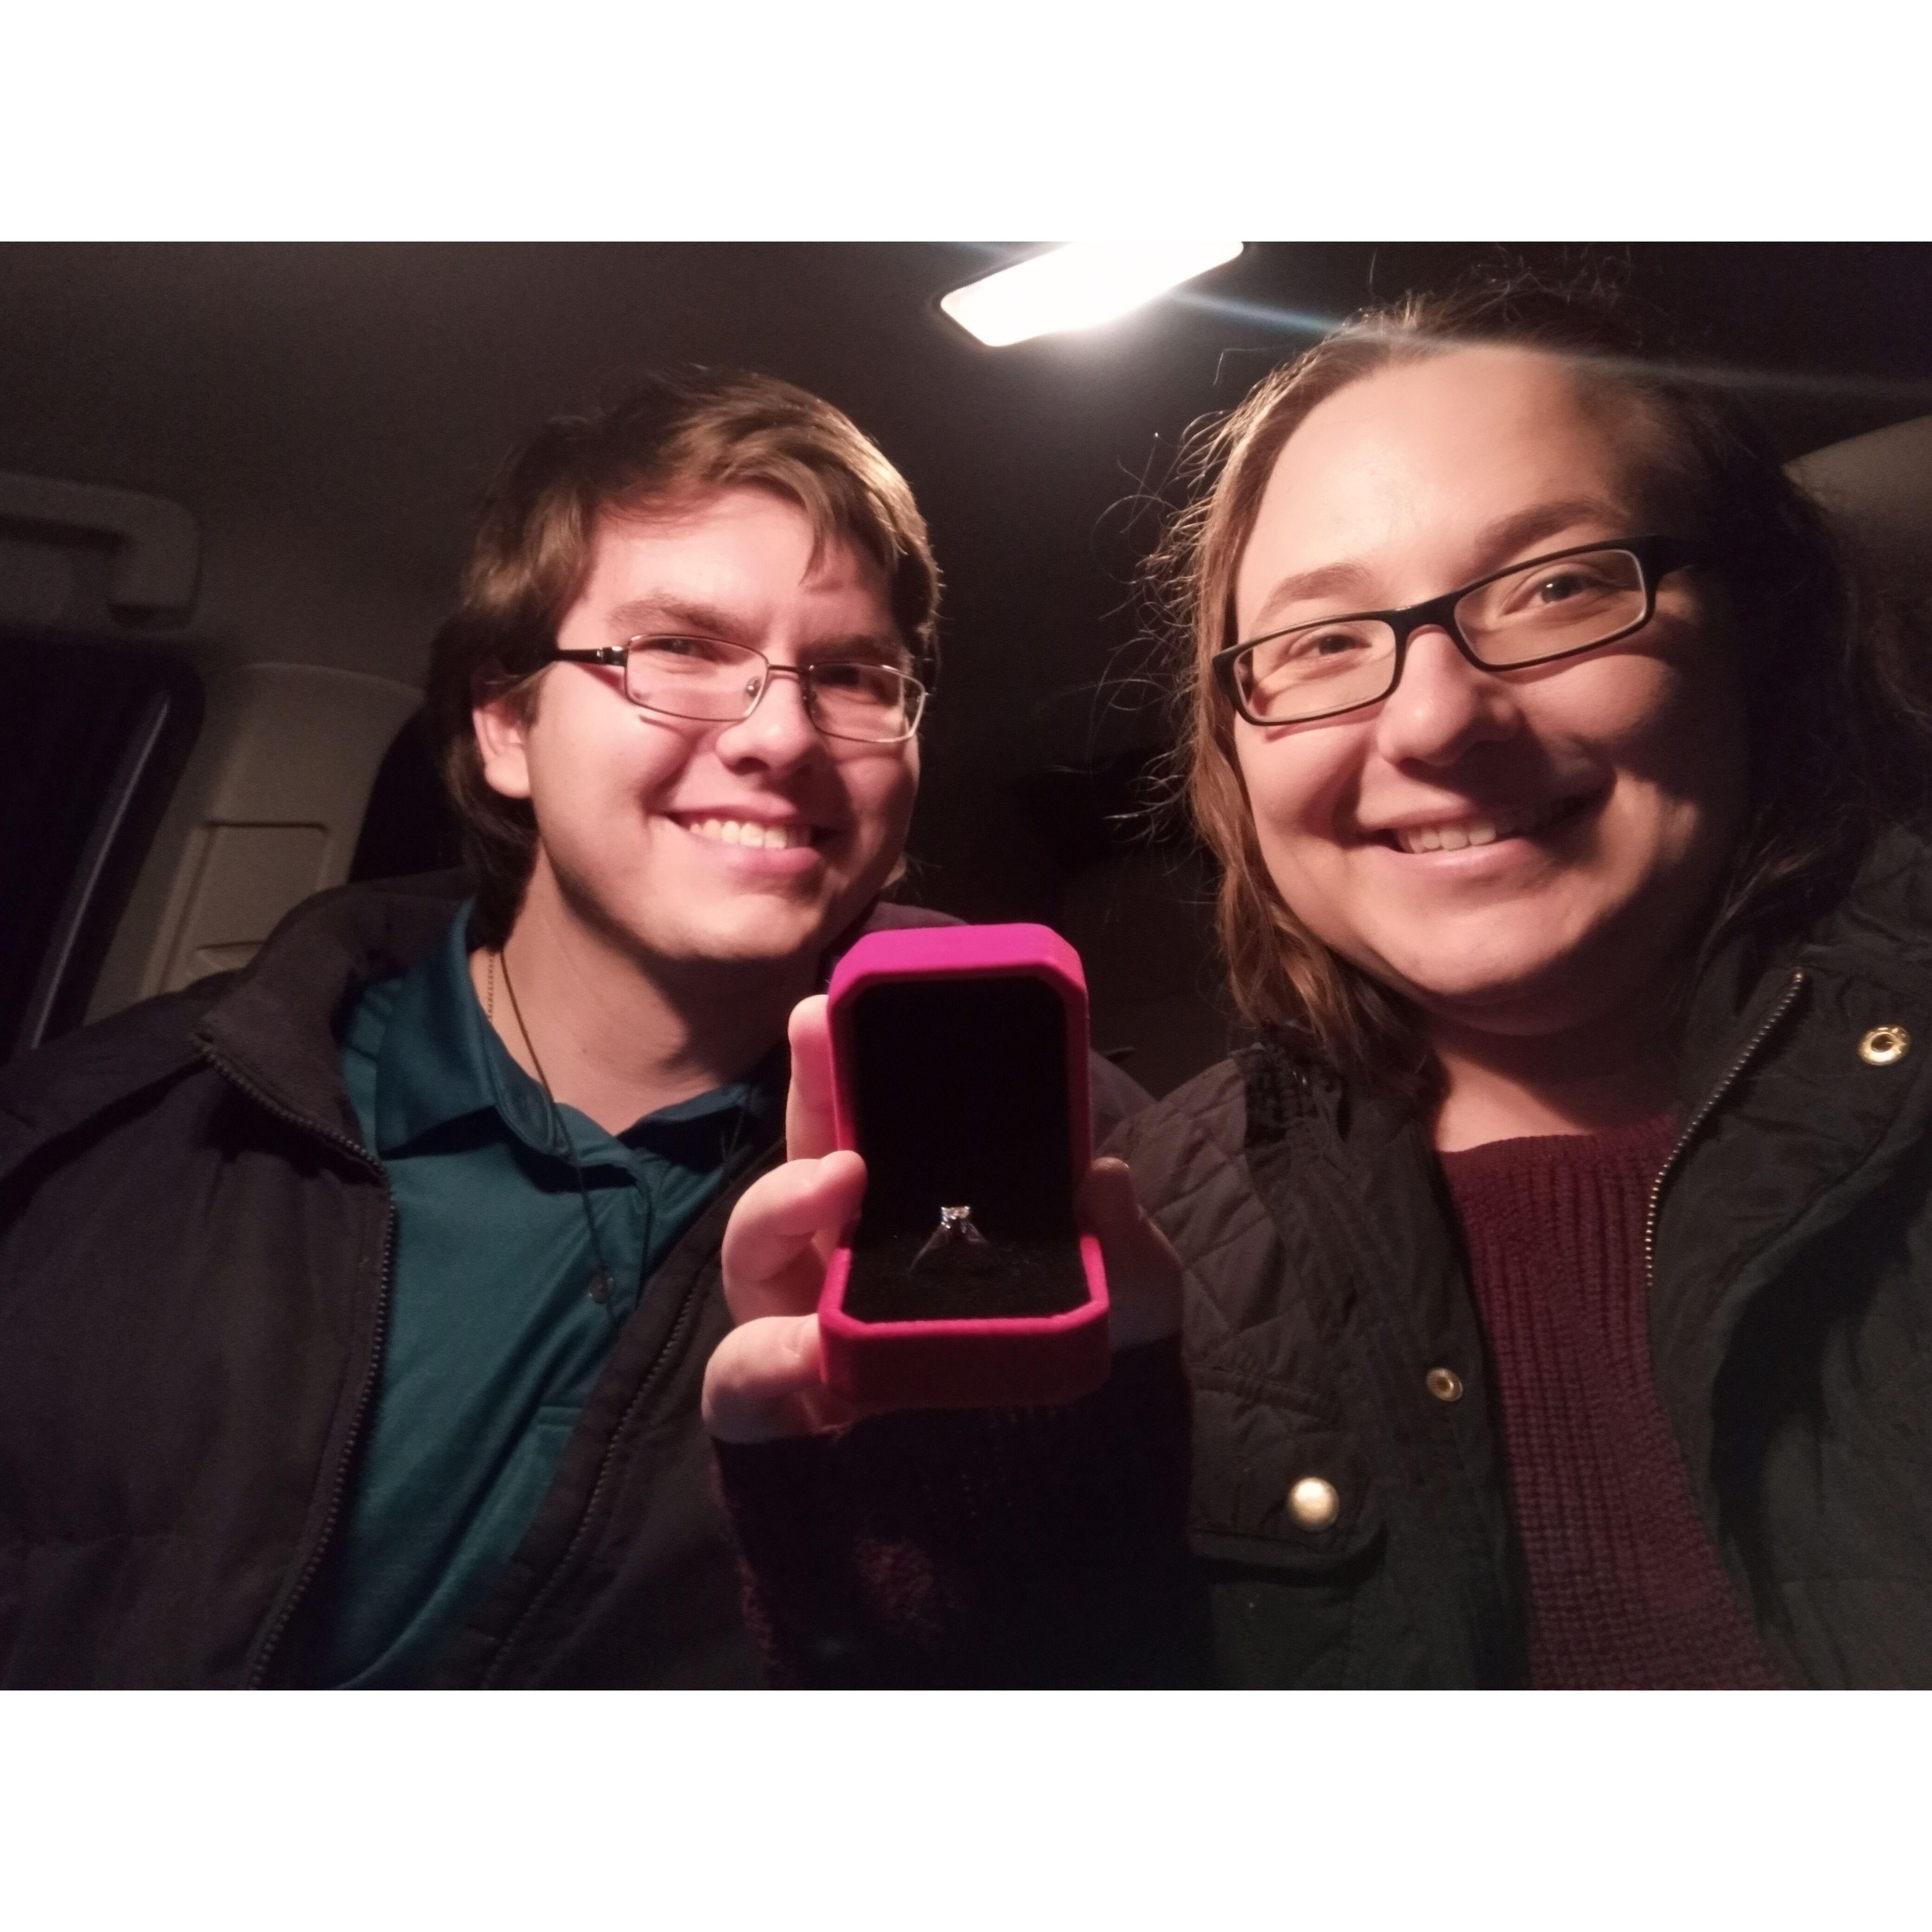 On the night of our anniversary, February 25 2022, he proposed and she said yes!